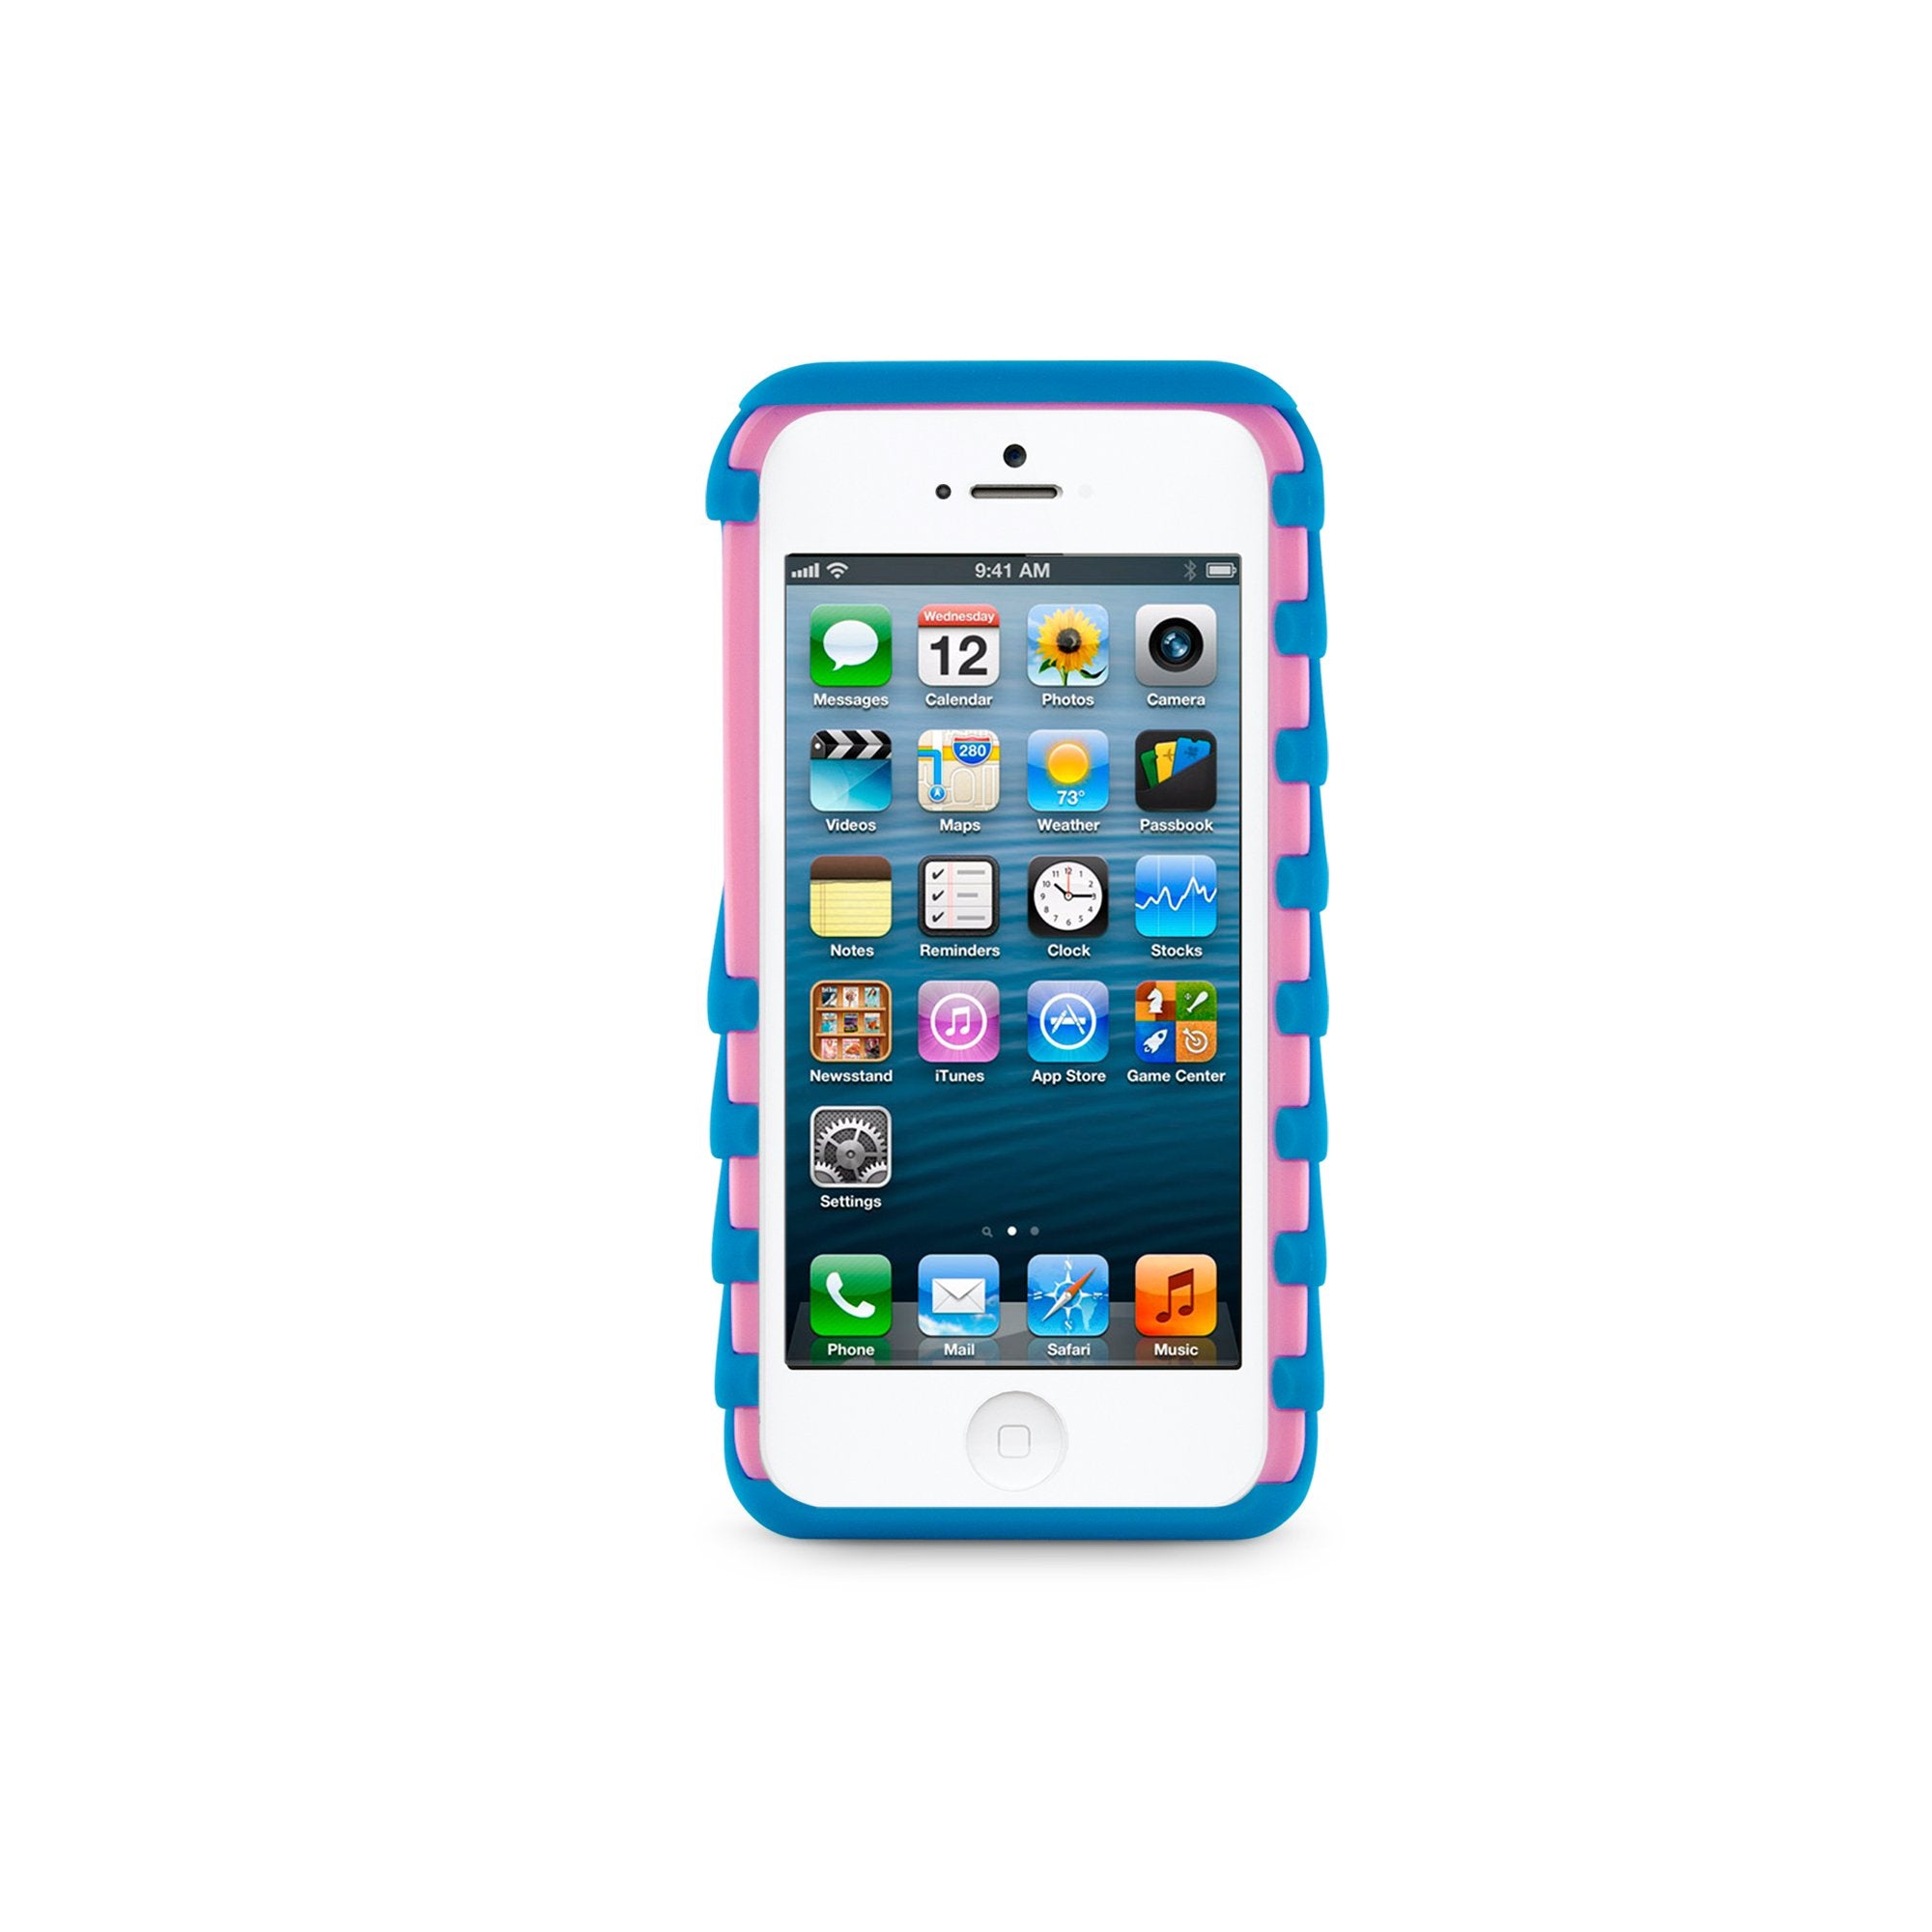 iLuv ICA7T325BLU Pulse Case Protection for Apple iPhone 5 and iPhone 5S - 1 Pack - Retail Packaging - Blue